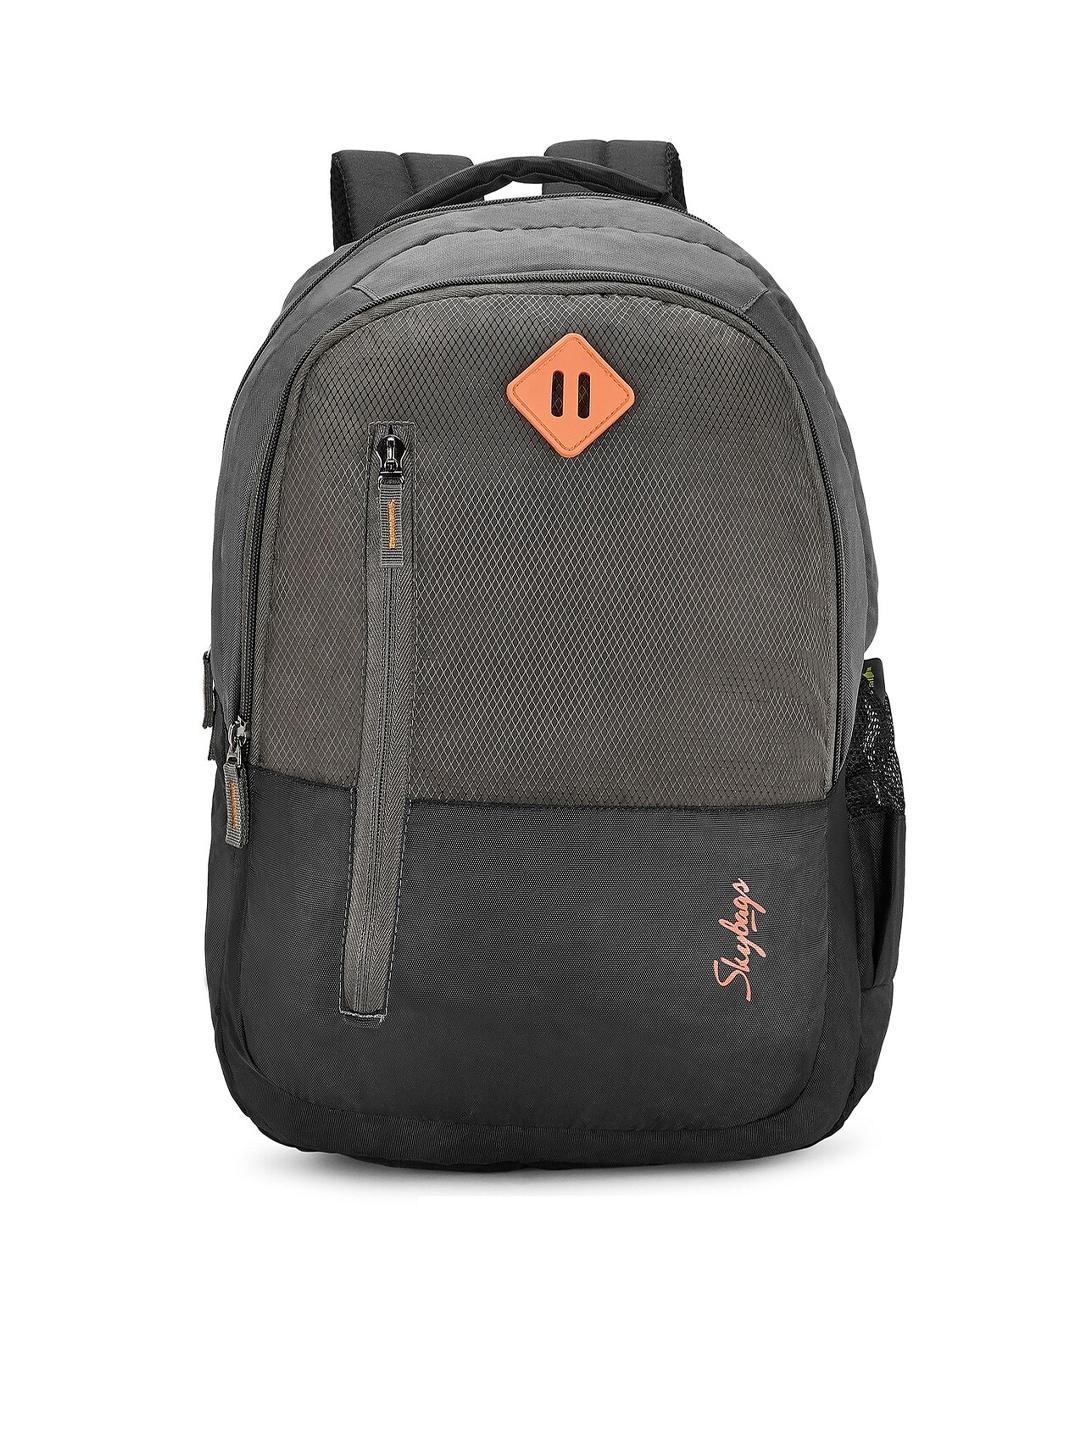 skybags-unisex-laptop-backpack